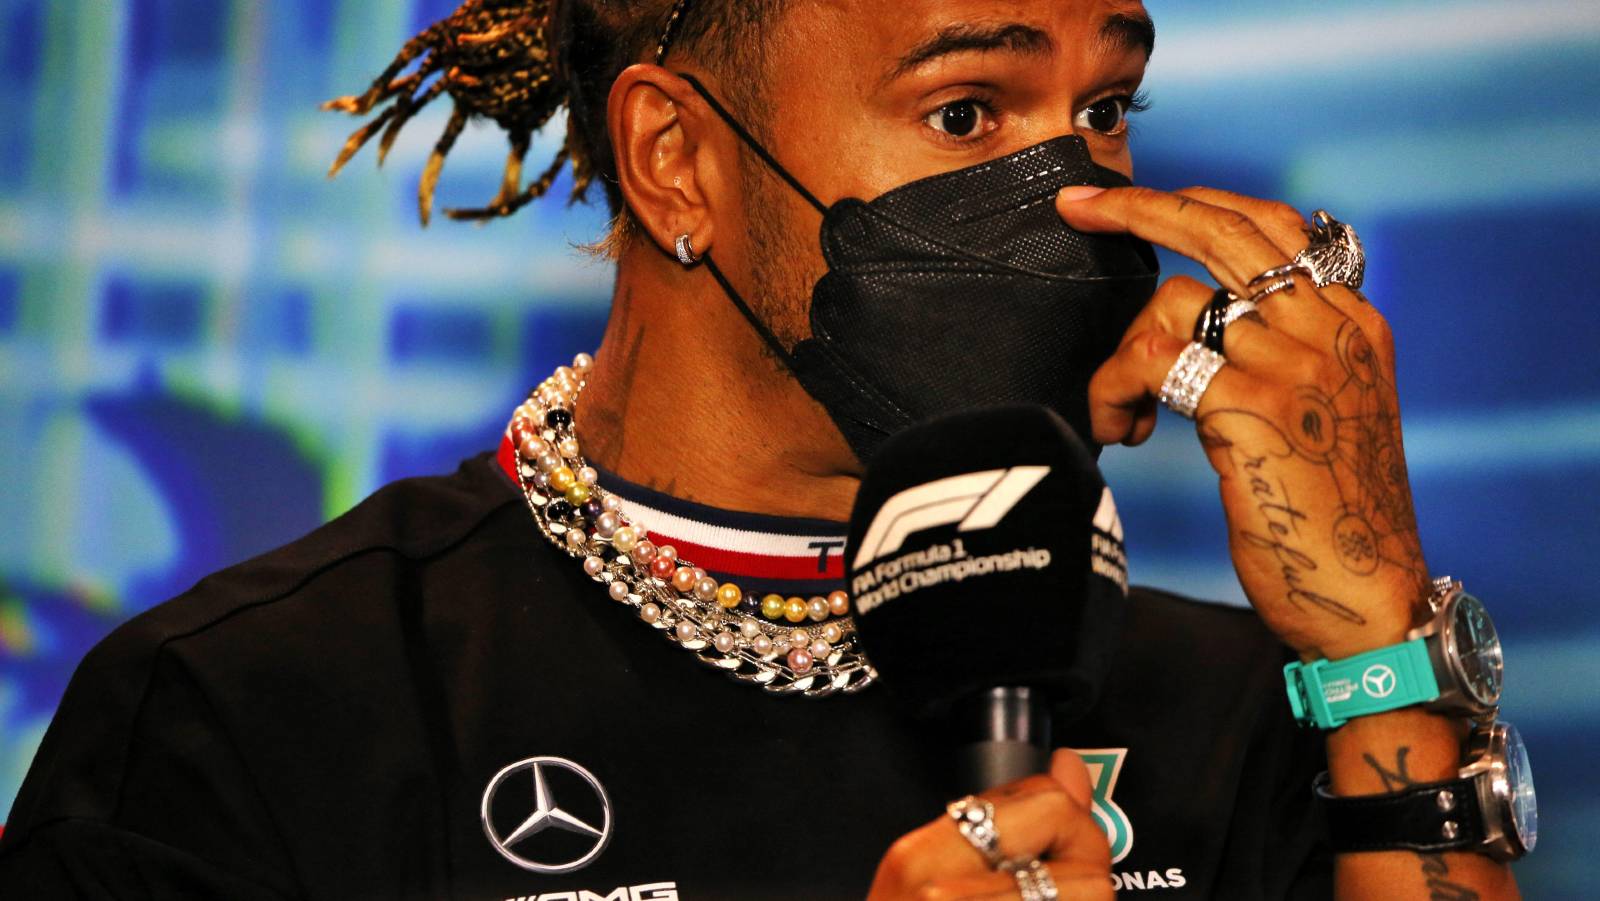 Lewis Hamilton "was just f*cking with it" in provocative approach to piercings ban